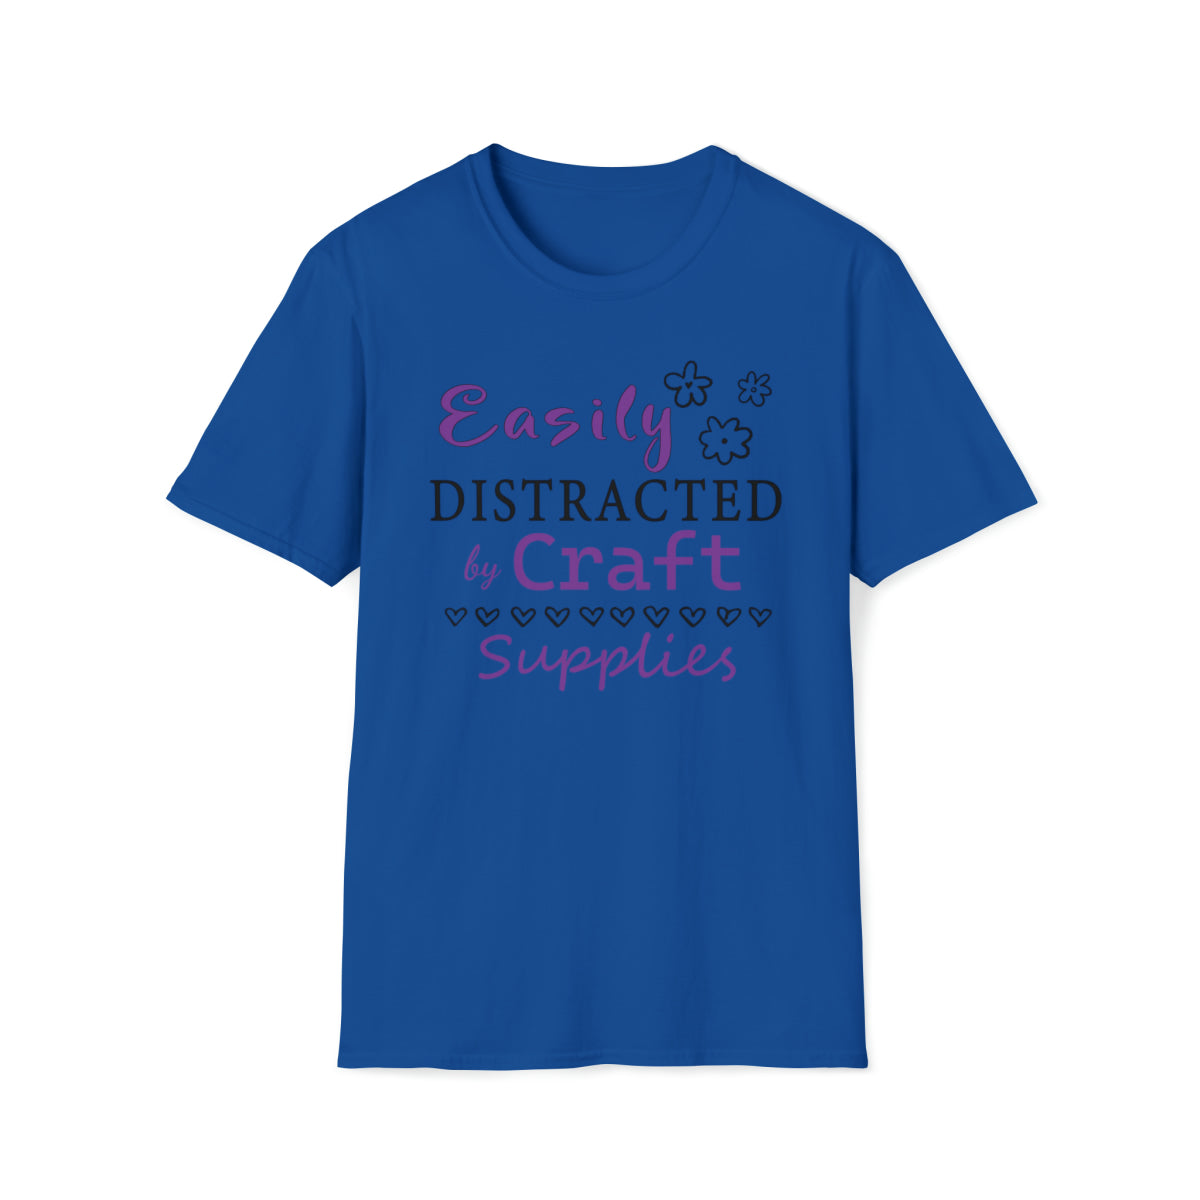 Easily Distracted by Craft Supplies - Short Sleeve Unisex Soft Style T-Shirt